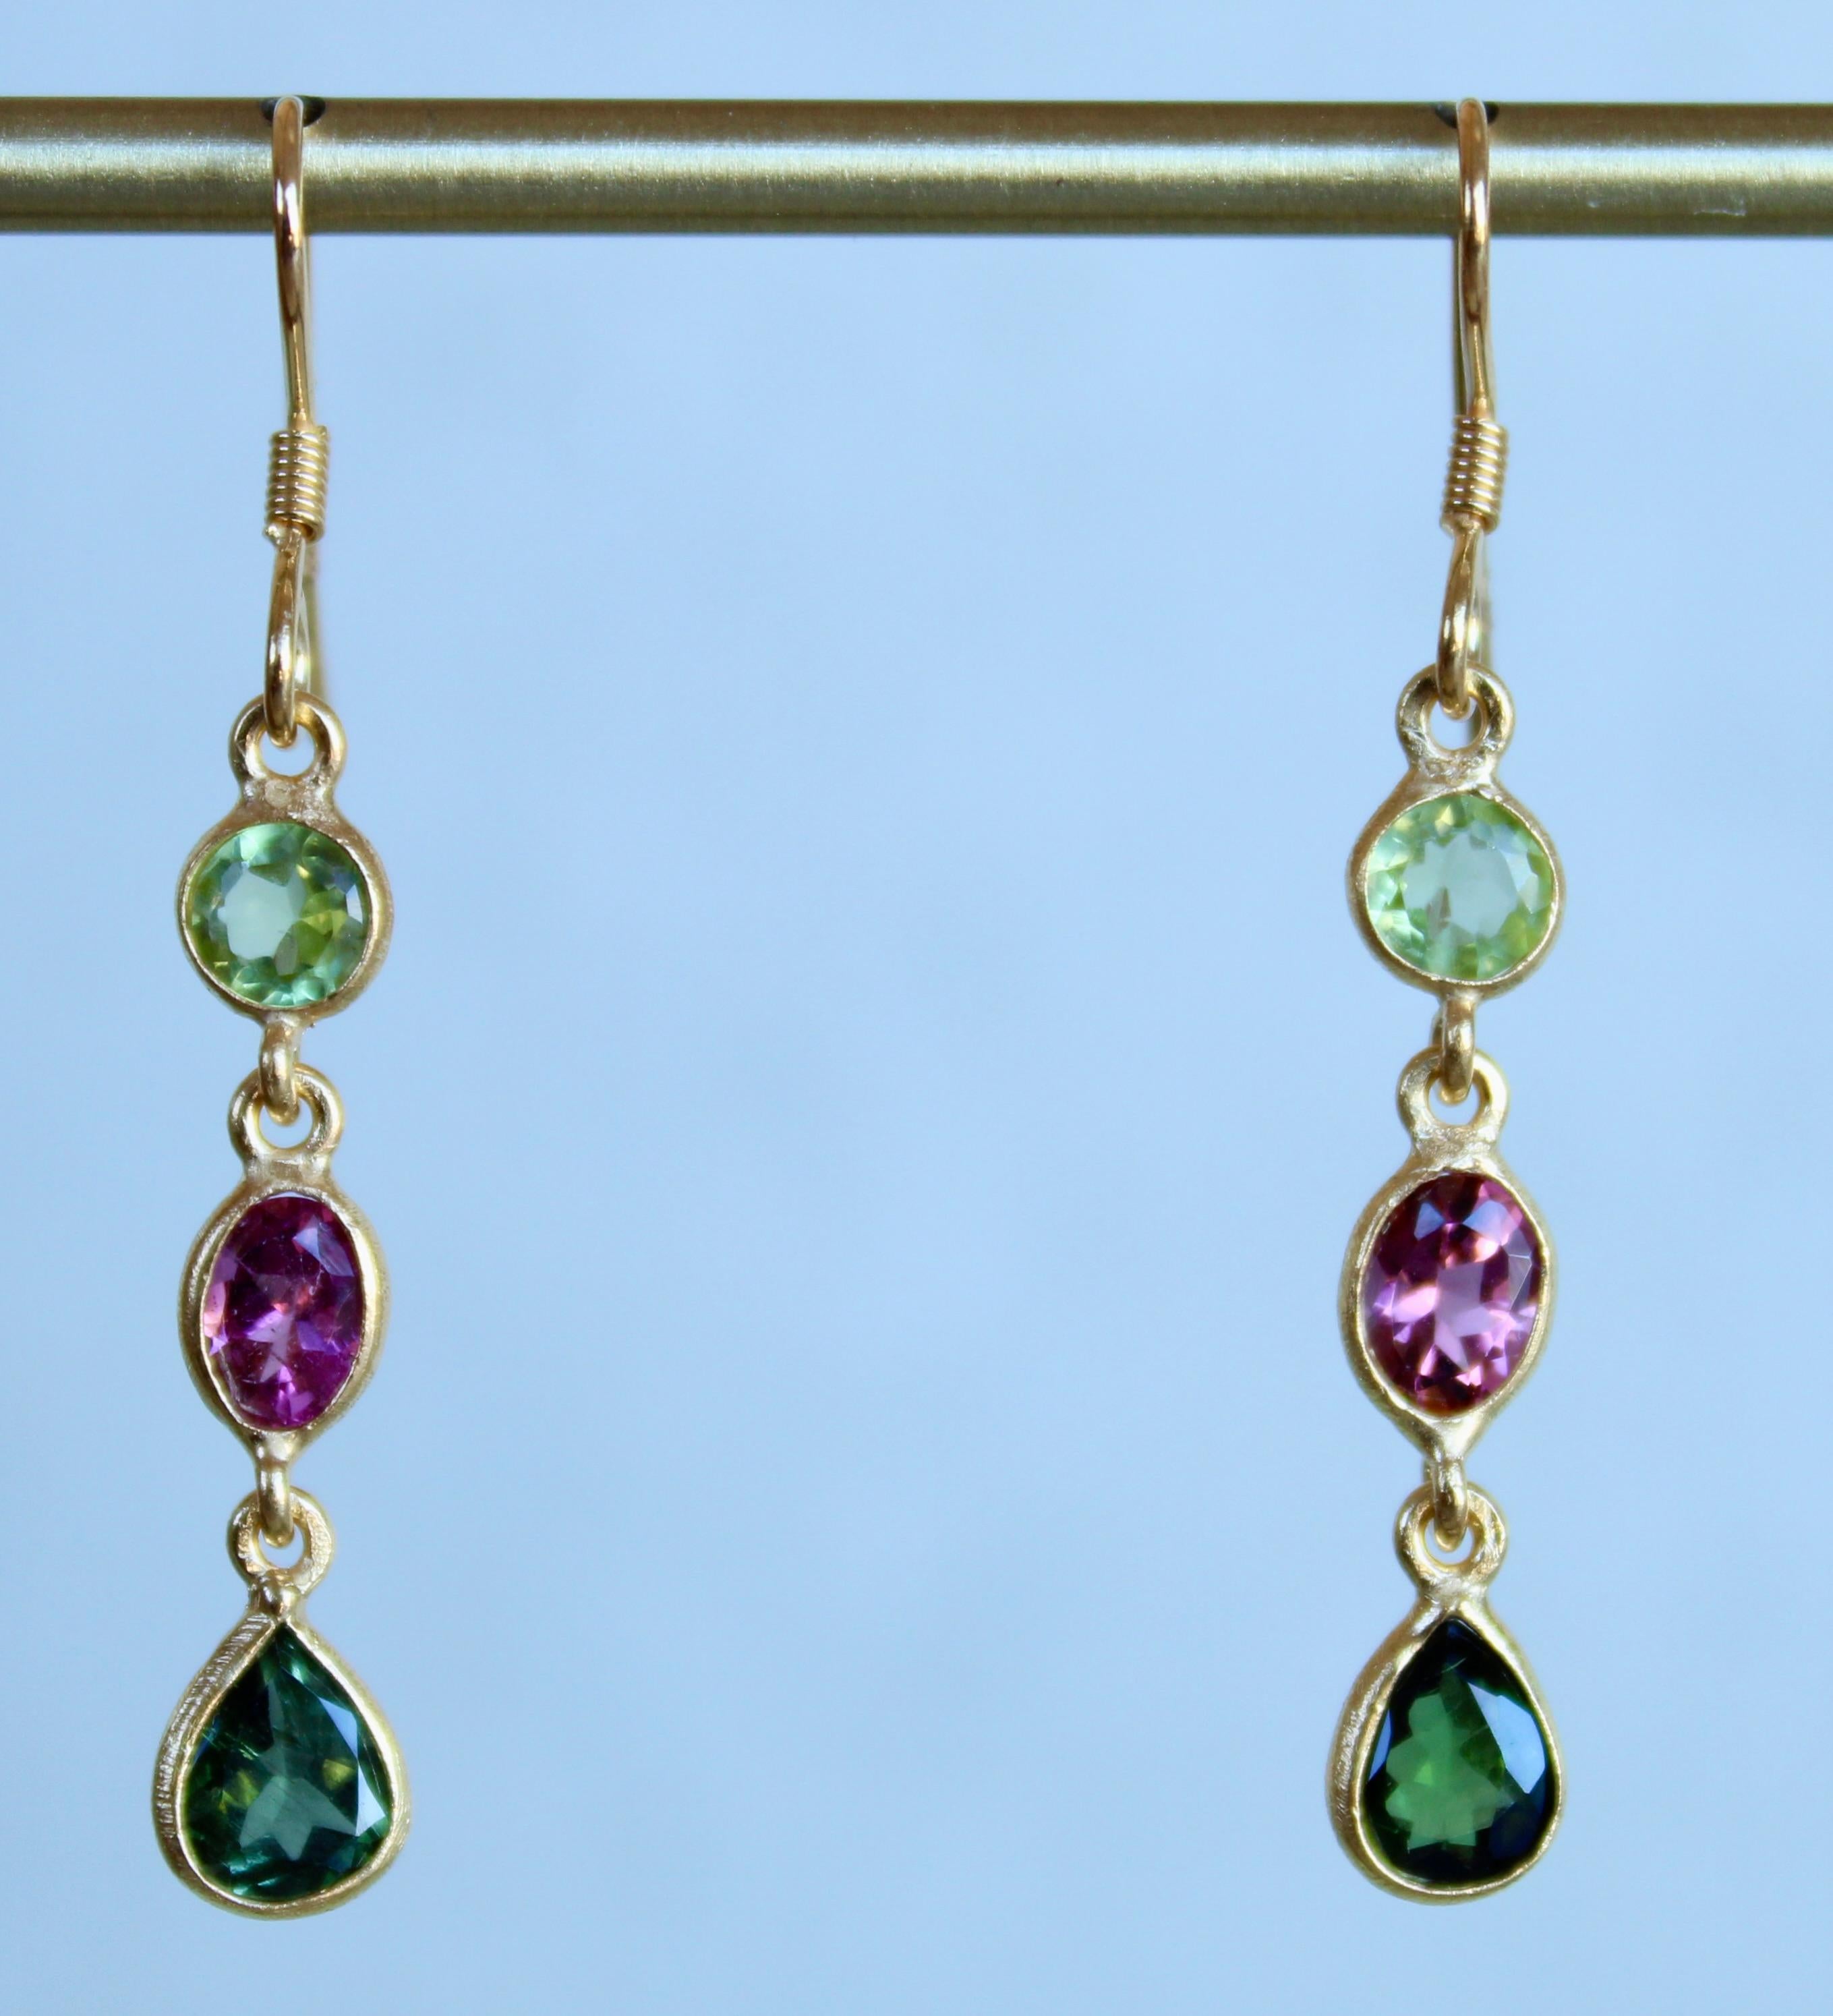 Beautiful, bright and rare these three stone dangle earrings are comprised of Peridot & Tourmaline. Each side is made up of a green Peridot round, pink Tourmaline oval and hunter green Tourmaline pear. Each stone is bezel set in 14 karat gold